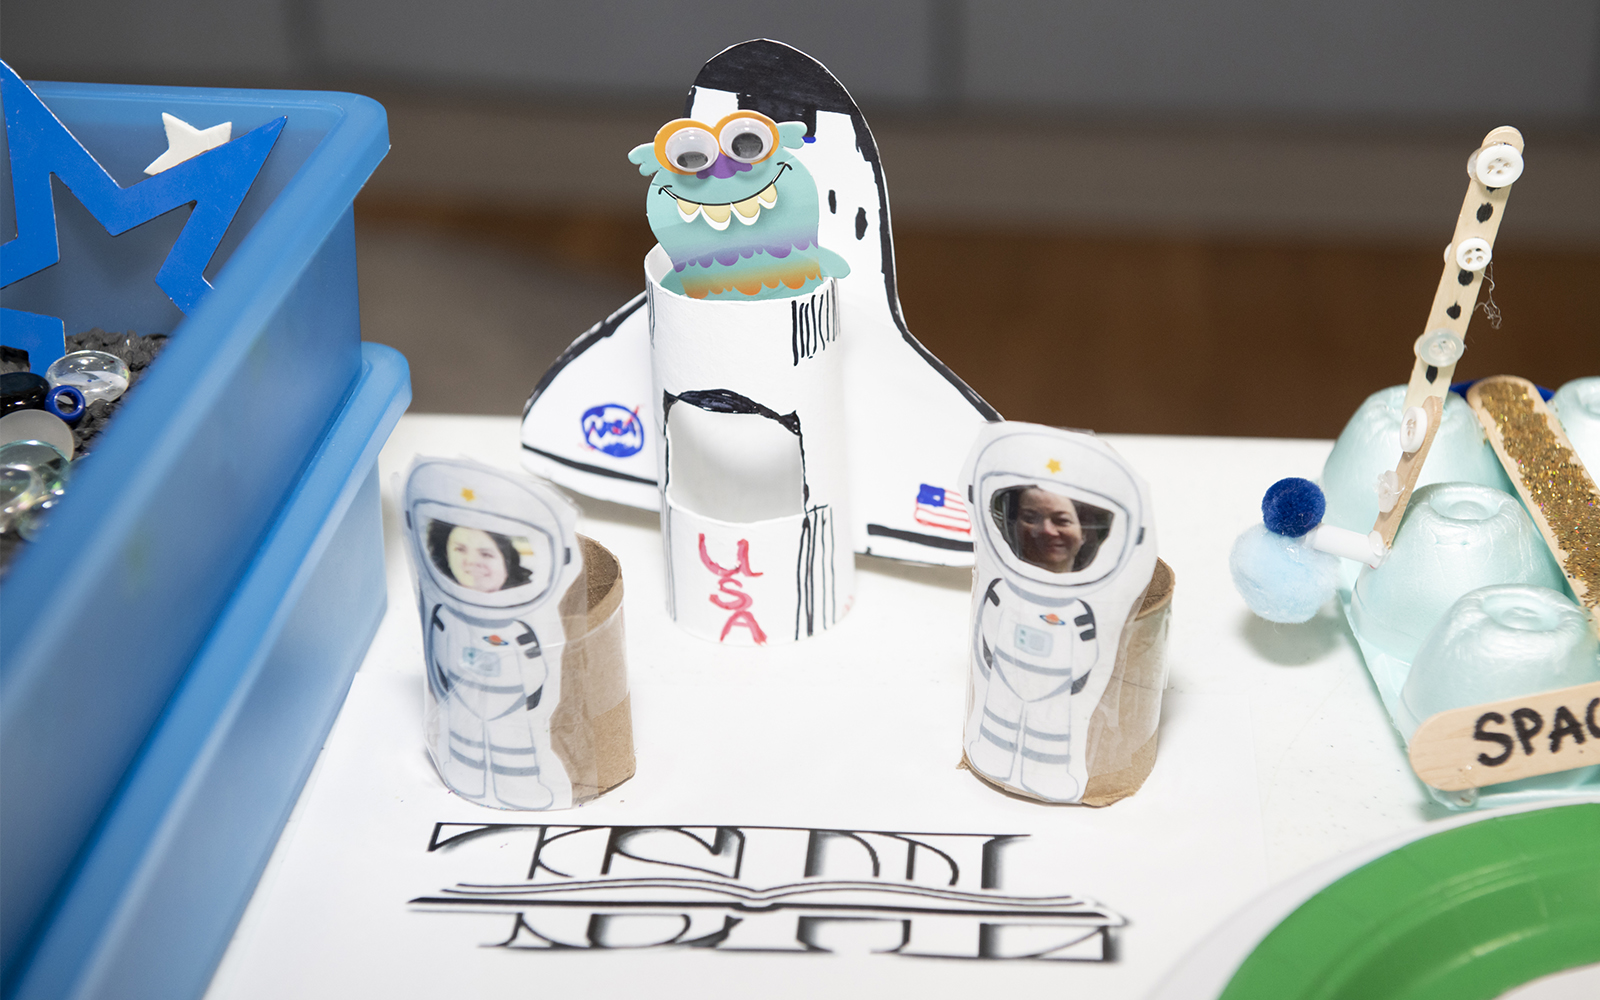 space themed crafts at the 2019 SRP workshop